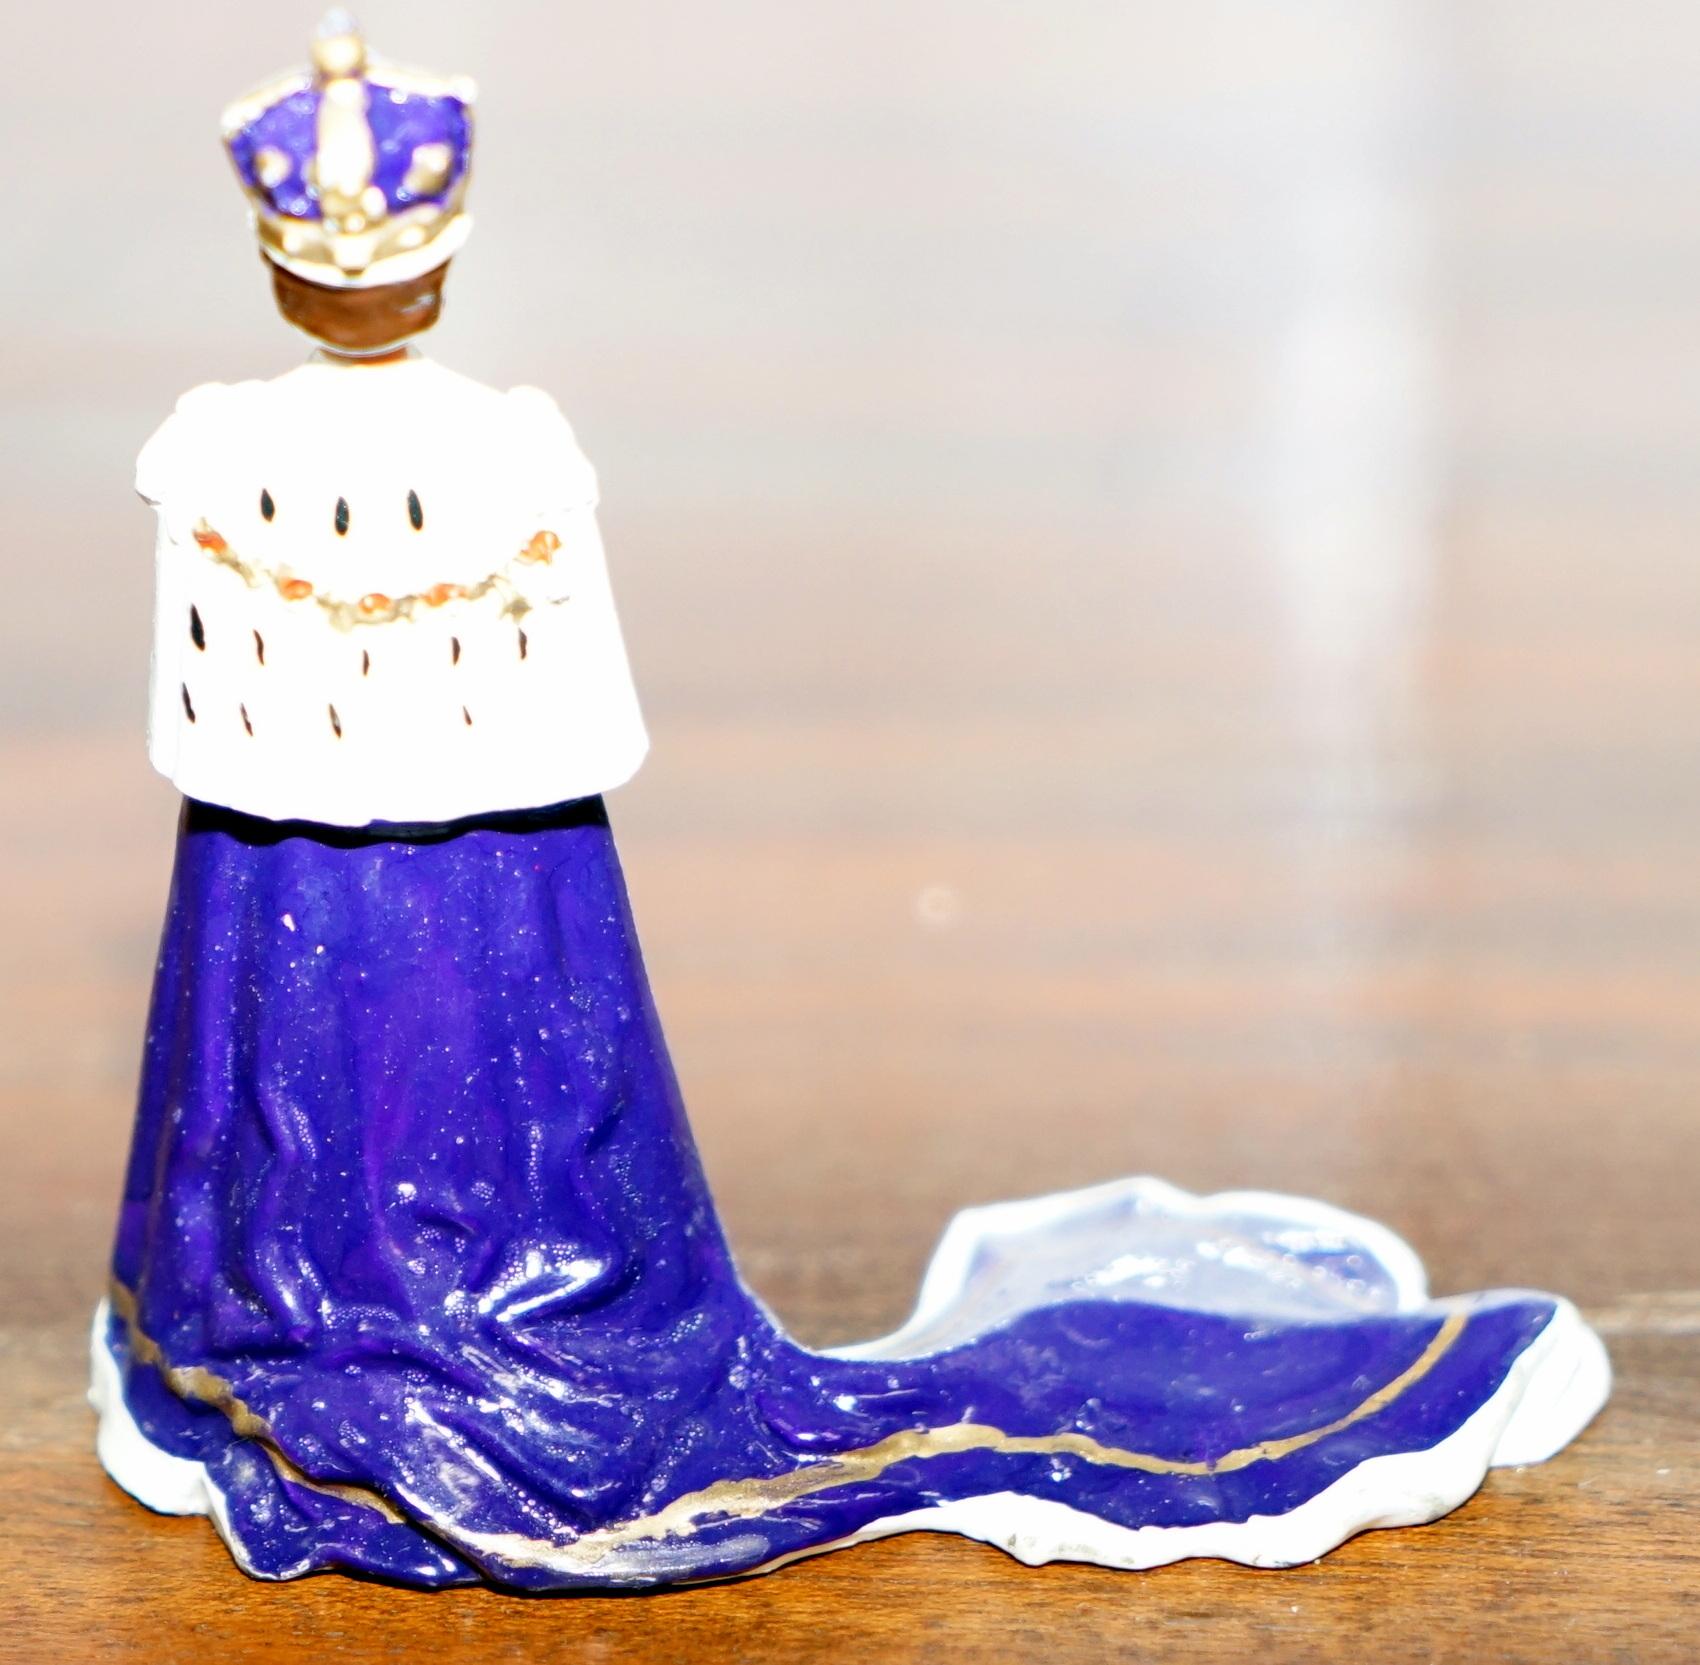 Hand-Crafted Antique 1953 Lead Toy HM the Queen Elizabeth II Coronation Rare Boxed Original